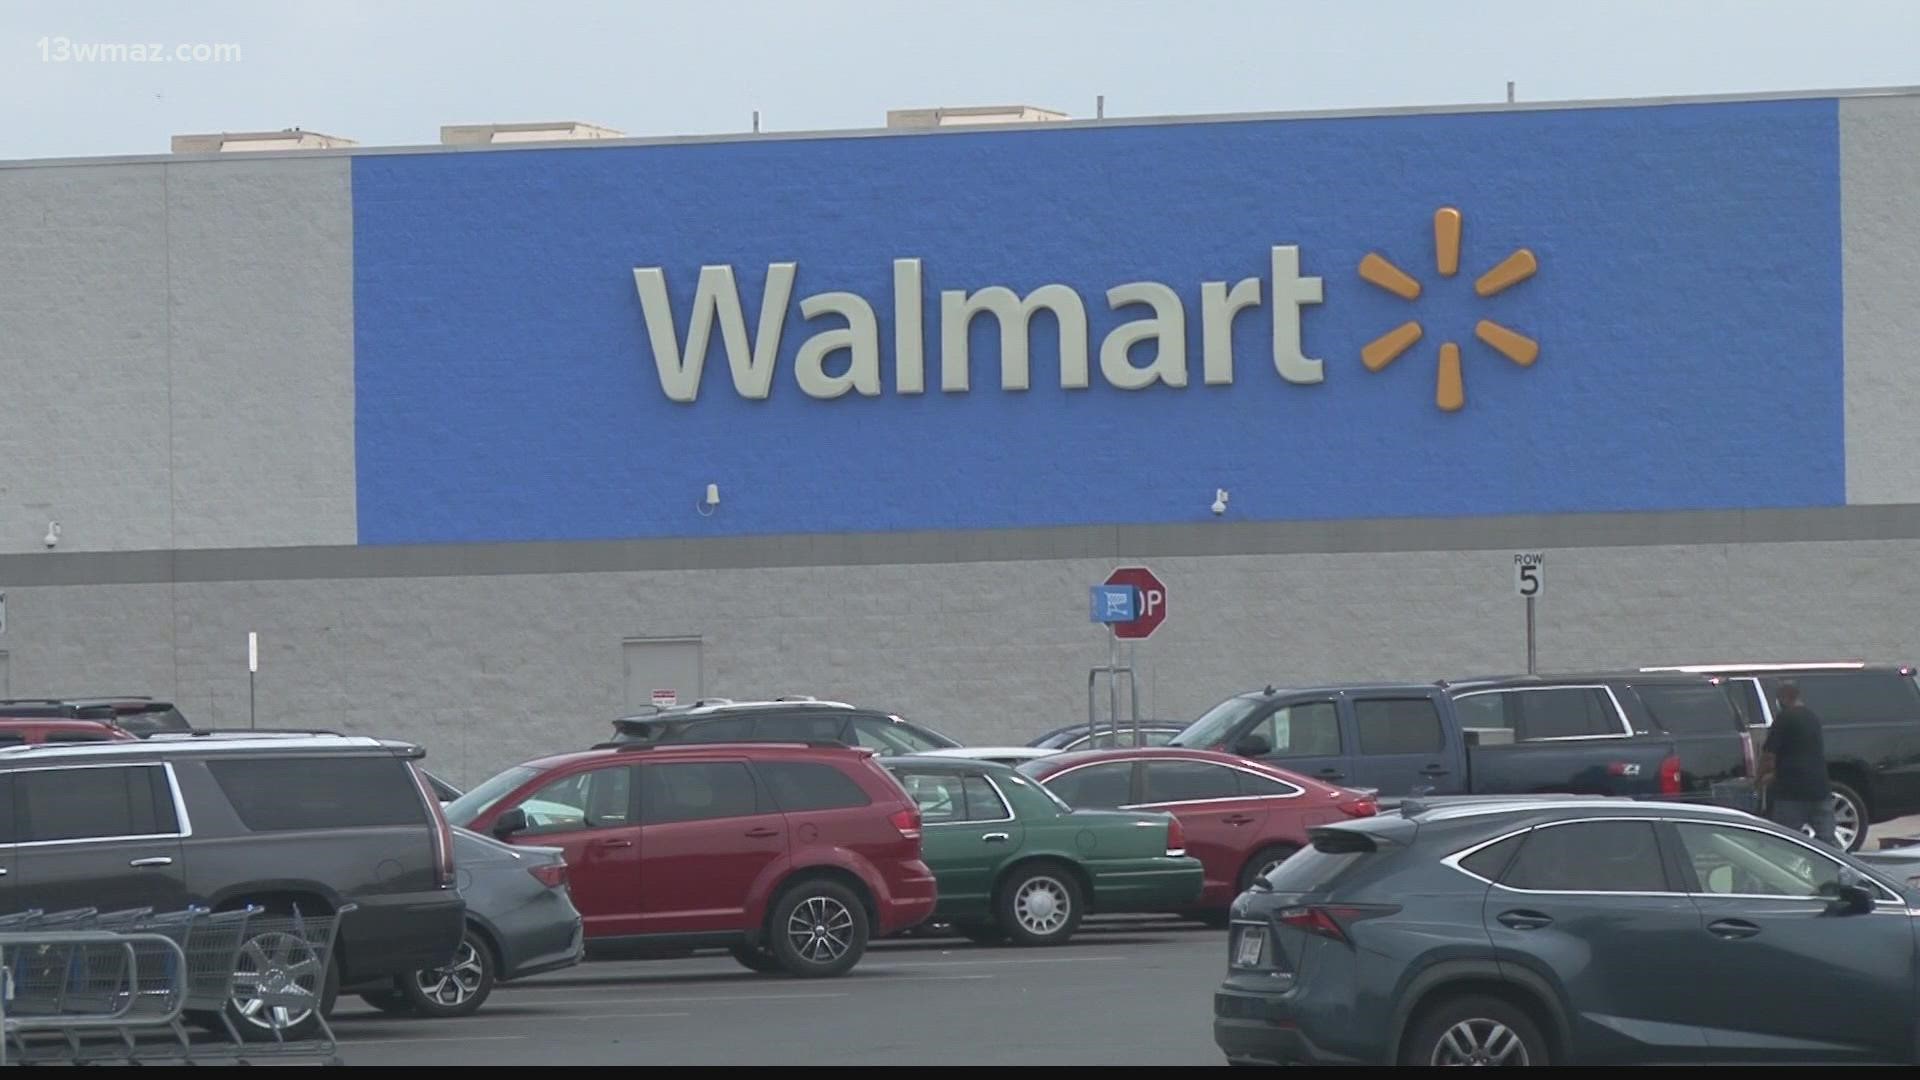 On Sunday, people at Walmart in Perry thought they saw a suspicious group of men taking photos and reported it to police.